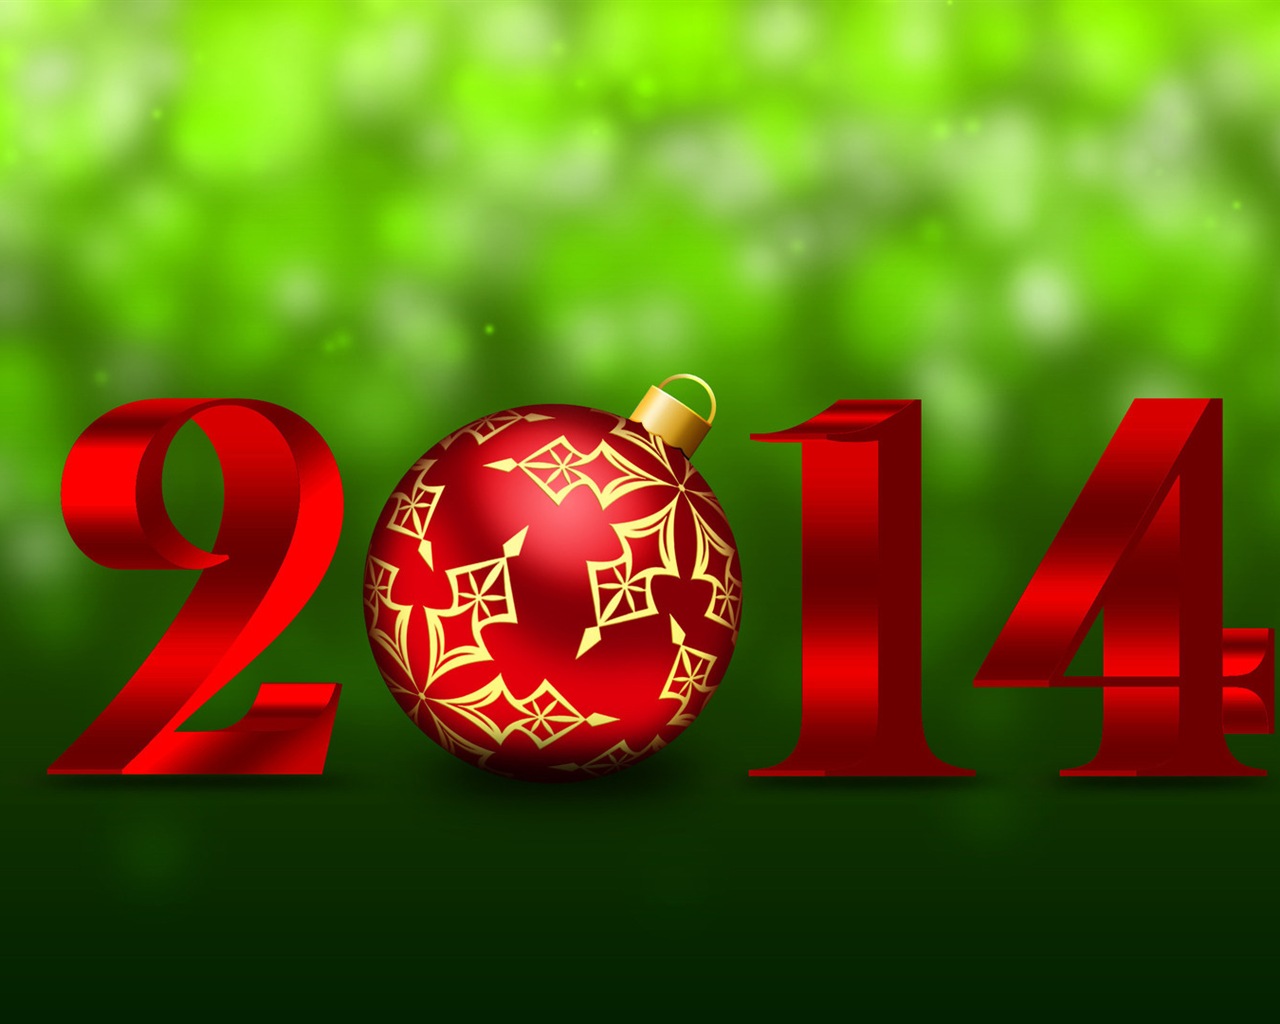 2014 New Year Theme HD Wallpapers (1) #3 - 1280x1024